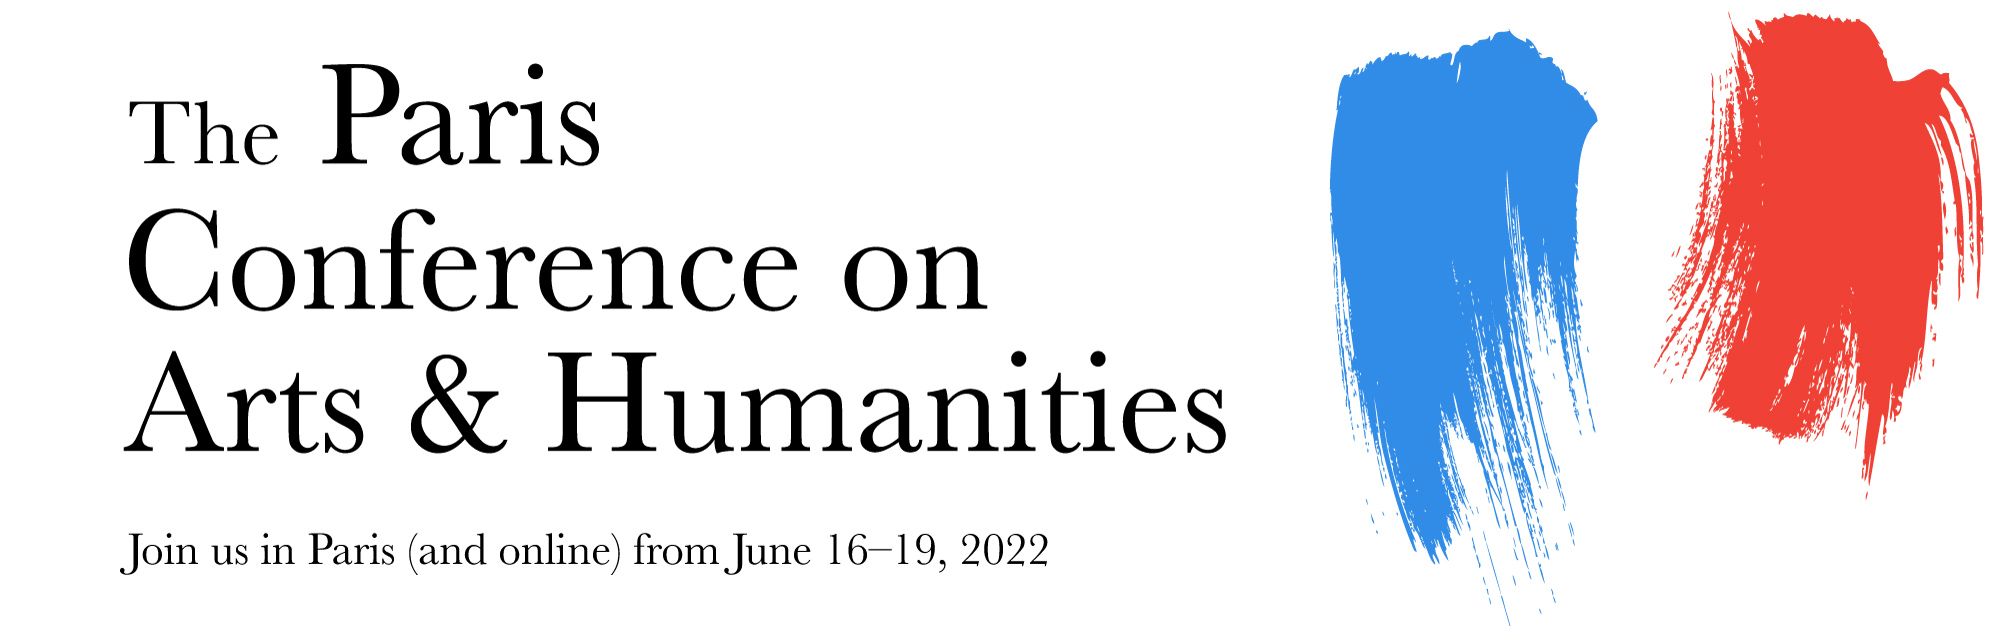 The-Paris-Conference-on-Arts-&-Humanities-(PCAH2022)-Logo